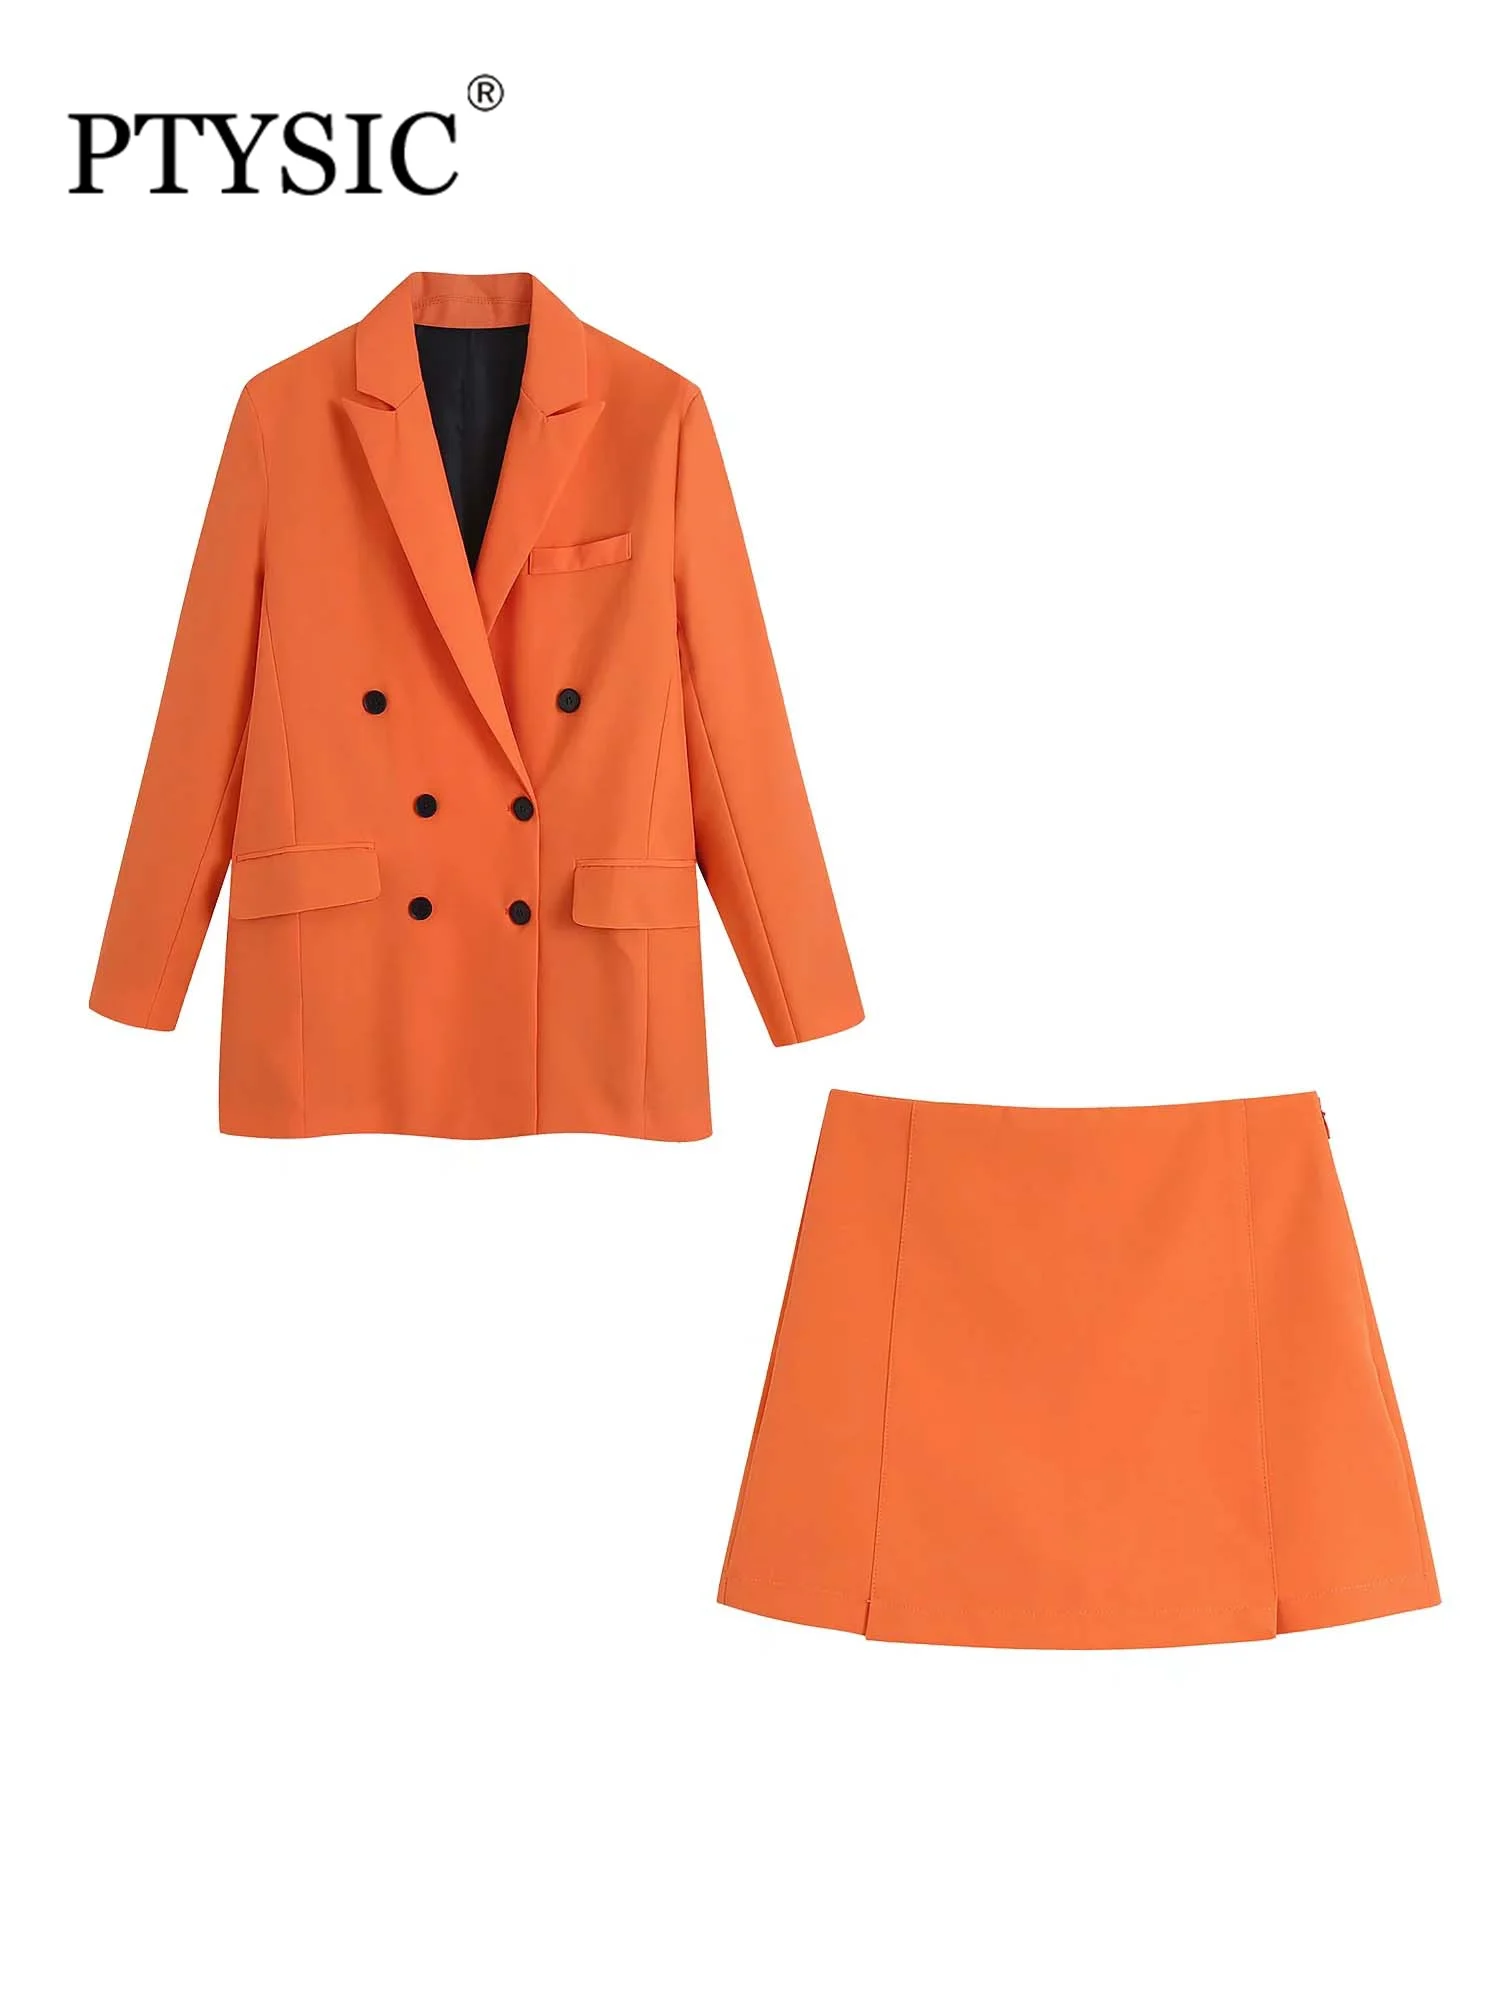 

PTYSIC Women Office Wear Shoulder With Buttoned Flap Pocket Full Sleeve Blazer Coat Solid Skirt Shorts Normcore Two Piece Sets